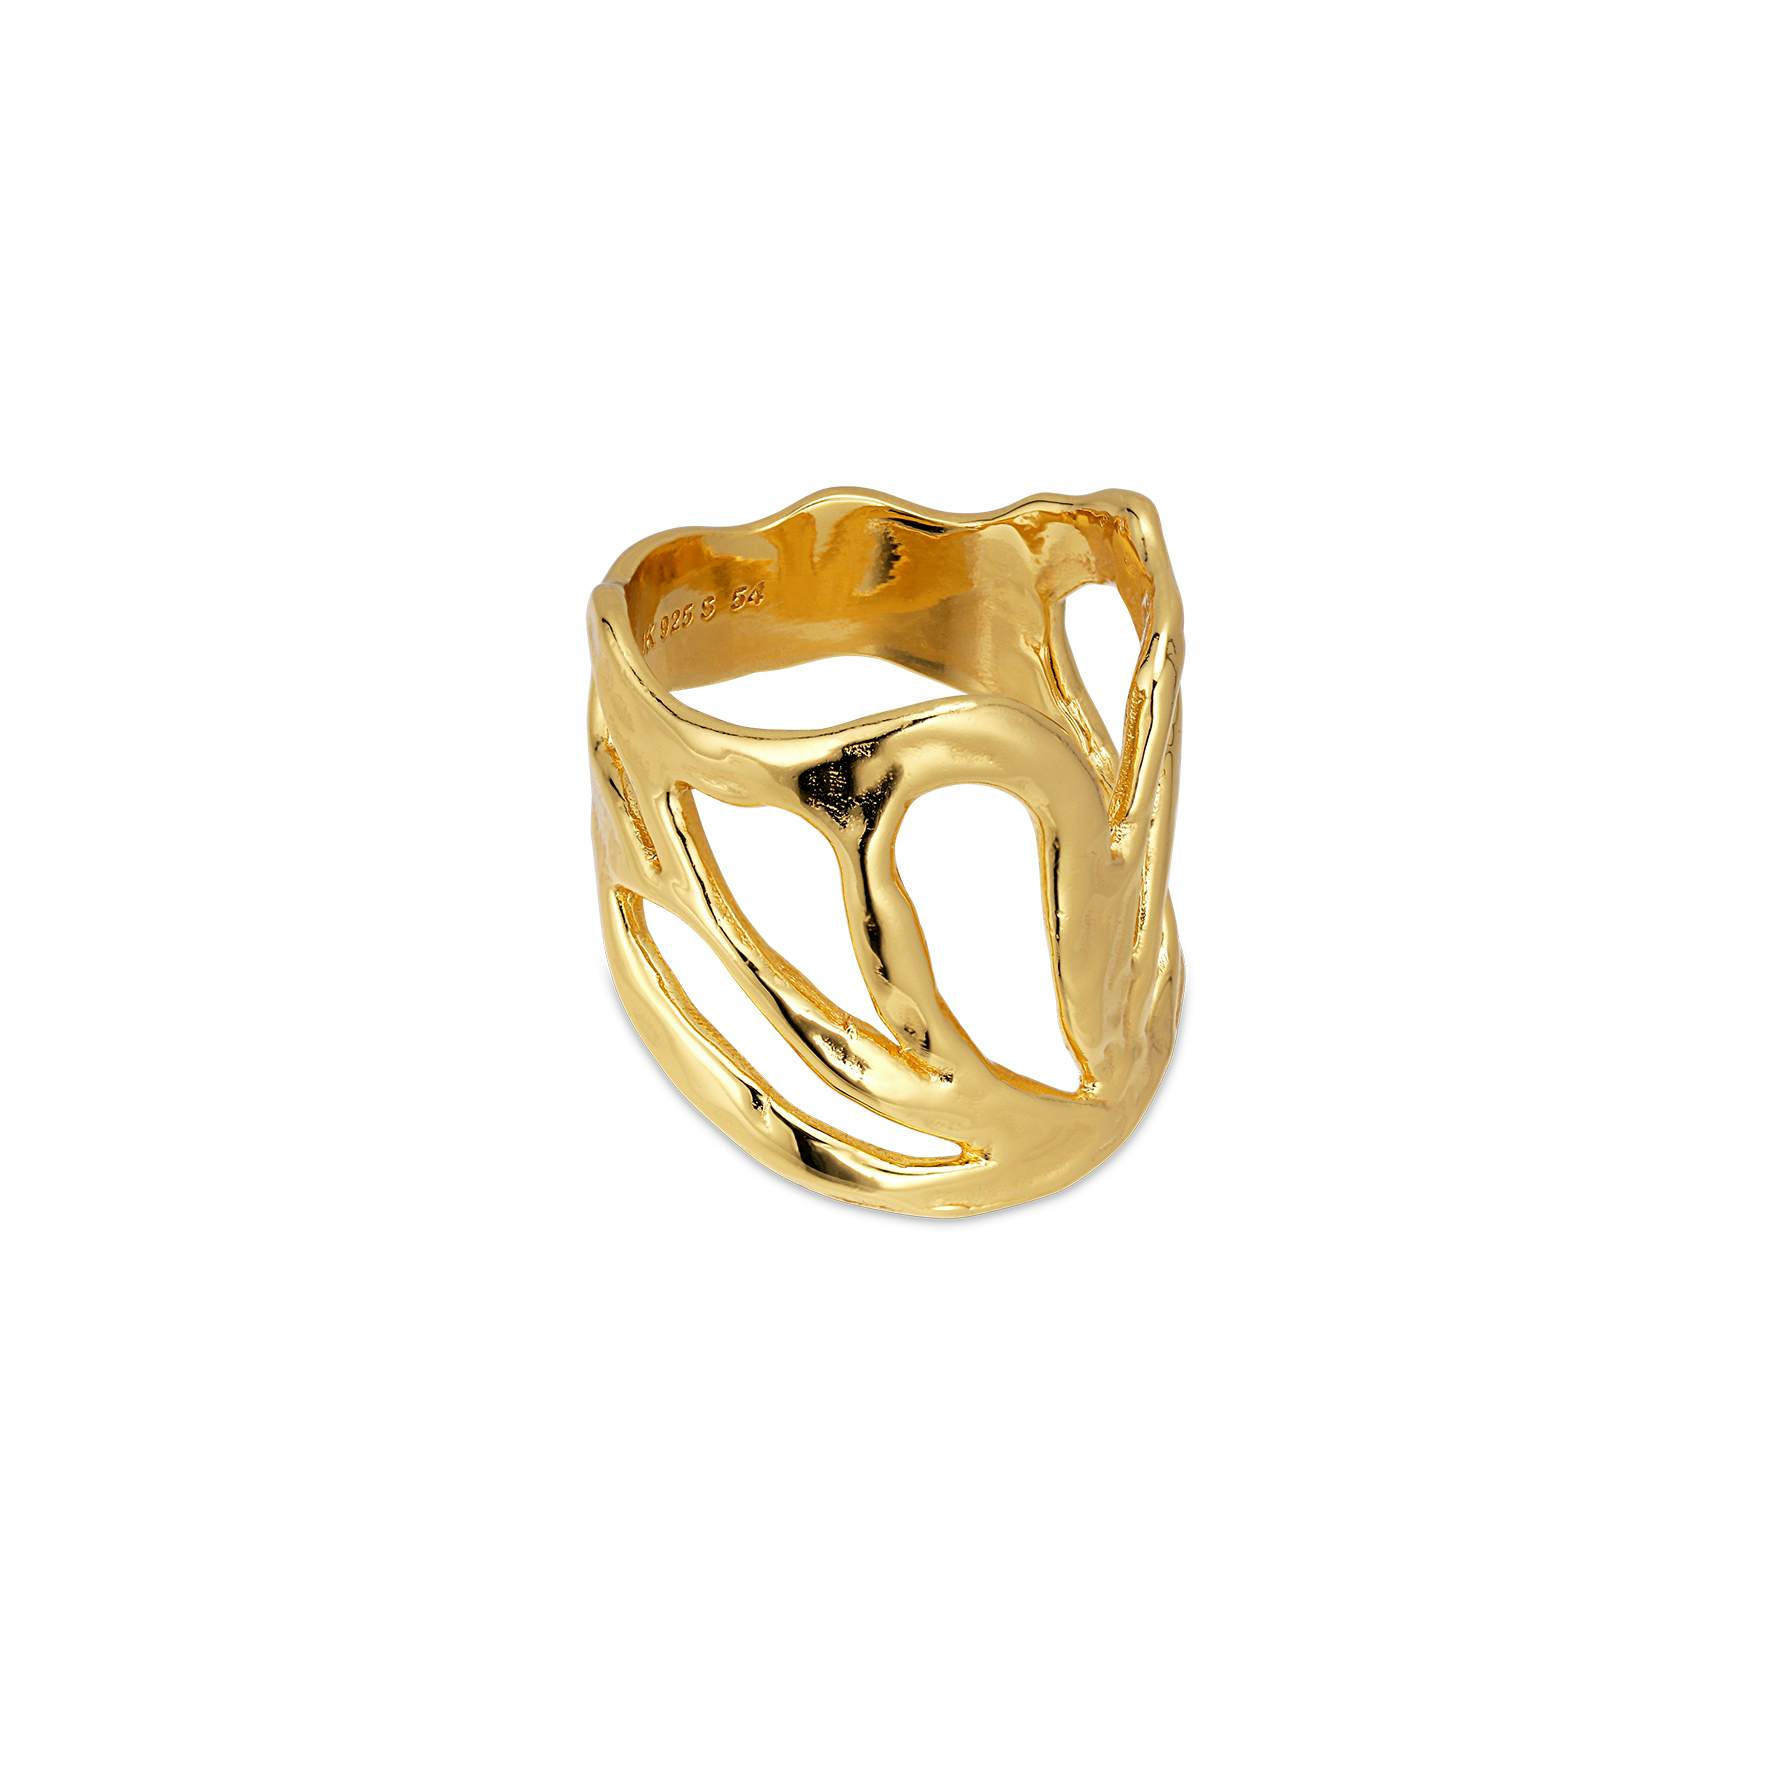 Big Butterfly Ring from Jane Kønig in Goldplated-Silver Sterling 925